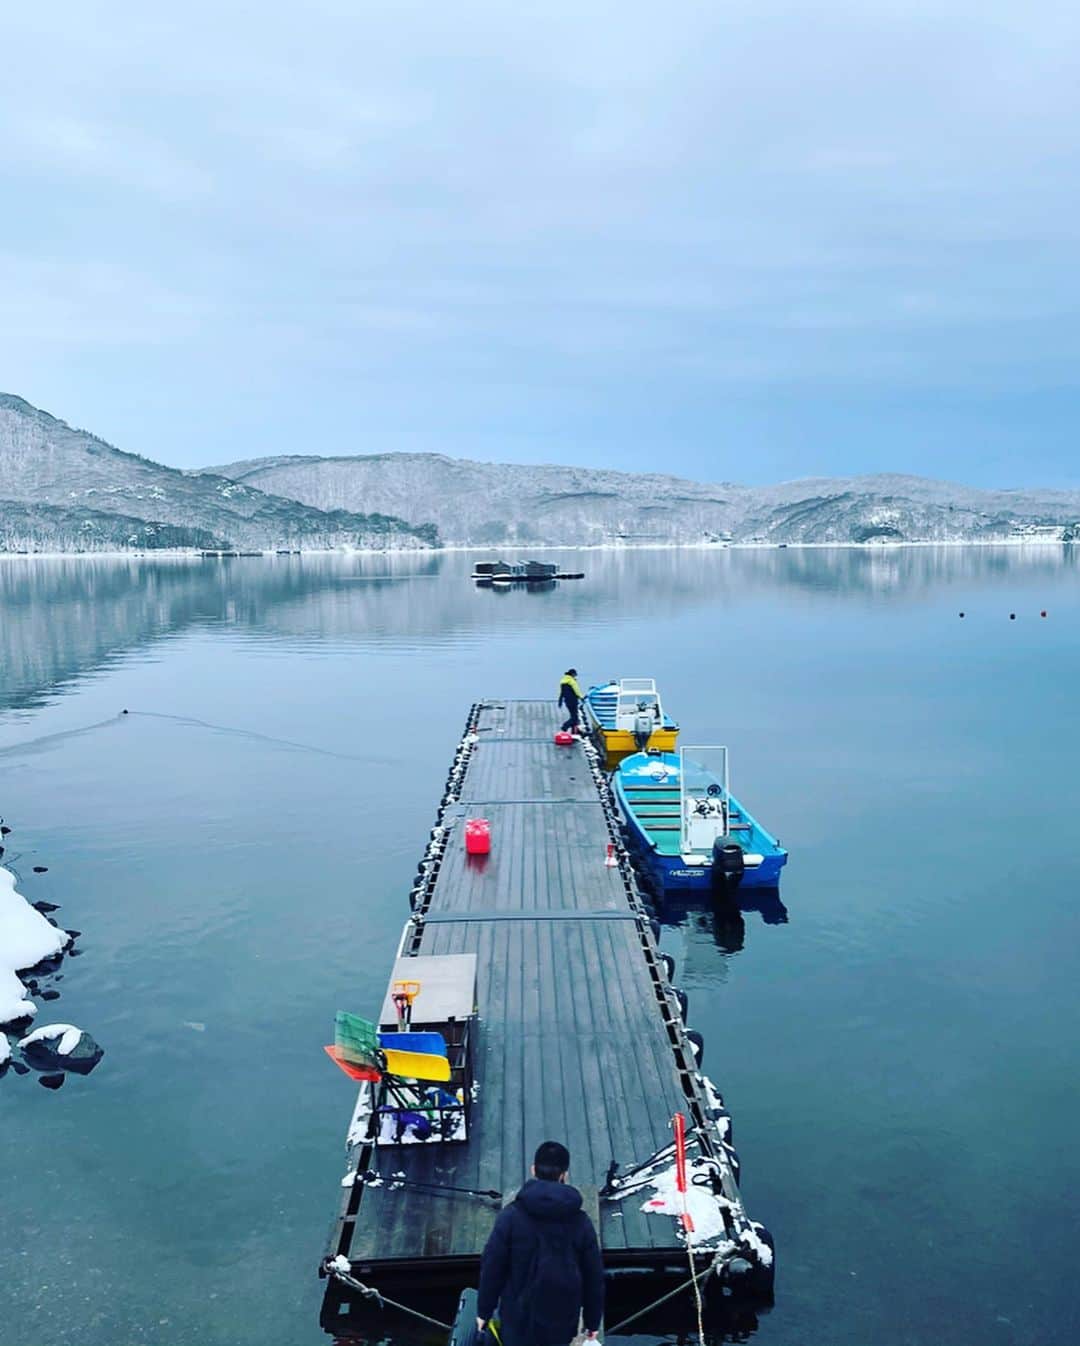 Rediscover Fukushimaさんのインスタグラム写真 - (Rediscover FukushimaInstagram)「I tried smelt fishing!😆🎣(and failed)   Would you?🧐  During November and December, “wakasagi” or smelt fishing is done from on board a traditional Japanese houseboat. Those who go from January to March can fish from atop the ice on the frozen lake! ❄️   Either way, you will be decked out inside the houseboat or tent with warm heaters that allow you to fish in comfort. 🥰  I went on December 28t​h​ so the water wasn’t frozen yet. The scenery around the lake was beautiful and snowy. It looked even more gorgeous mirrored on the calm surface of the lake. A small boat took me and my friends over to one of the houseboats. 🚤💦  A very important tip is to arrive as early as possible! Although the houseboats are located close to the shore and every seat has the chance of catching fish, the best seats are those closest to shore and they fill up quick so it’s best to arrive as early as possible to get a good seat. Unfortunately, I forgot to set my alarm to 4 am and woke up a bit late, so we ended up getting not so good seats. We actually caught zero fish! Which is pretty rare.🥺💦  Despite the lack of fish caught, I was nice to take it easy and spend time with good friends after a strenuous day of skiing on the day before. Hanging out in the heated fishing area and looking out the windows at the gorgeous scenery and its reflection on the lake was really relaxing. I definitely recommend giving this activity a try, just be sure to arrive as early as possible! 😅  I attached a picture from when my coworker went and managed to catch a lot of fish on the ice! ❄️ (I’m very jealous, I will be going back to actually catch fish someday! 😈🎣)  Read more on our website:  https://fukushima.travel/destination/smelt-ice-fishing/92  🐟🐟🐟  #wakasagi #ワカサギ #ワカサギ釣り #Wakasagifishing #icefishing #icefishingjapan #smeltfishing #smeltfishingjapan #fishingJapan #Japanfishingtrip #Gonefishing #fishing #Fishingtrip #Japan #outdoors #Japantrip #Fukushimagram #VisitFukushima! #MyJapan #WatersportsJapan #internationalFishingtrips #Internationalfishing #Fukushima #Tohoku #東北 #とうほく #日本 #日本釣り #魚釣り #福島の旅」1月6日 9時00分 - rediscoverfukushima